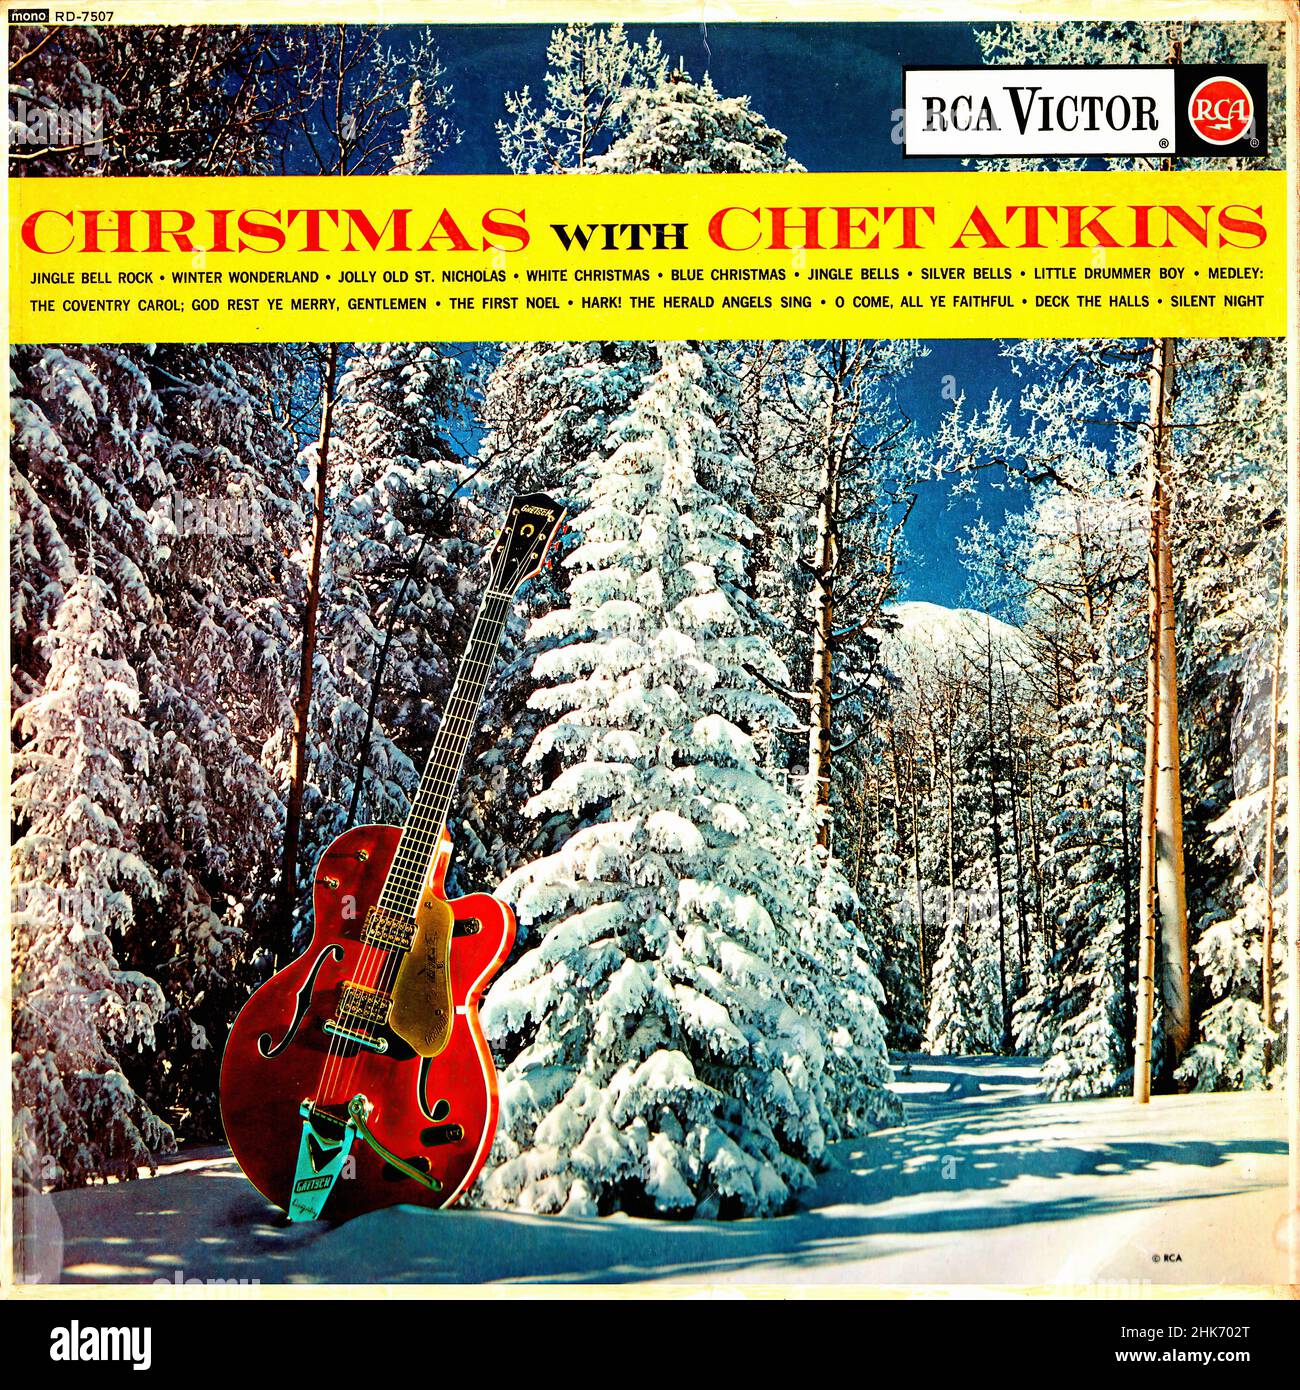 Vintage vinyl record cover - Atkins, Chet - Christmas with Chet Atkins - UK - 1961 Stock Photo